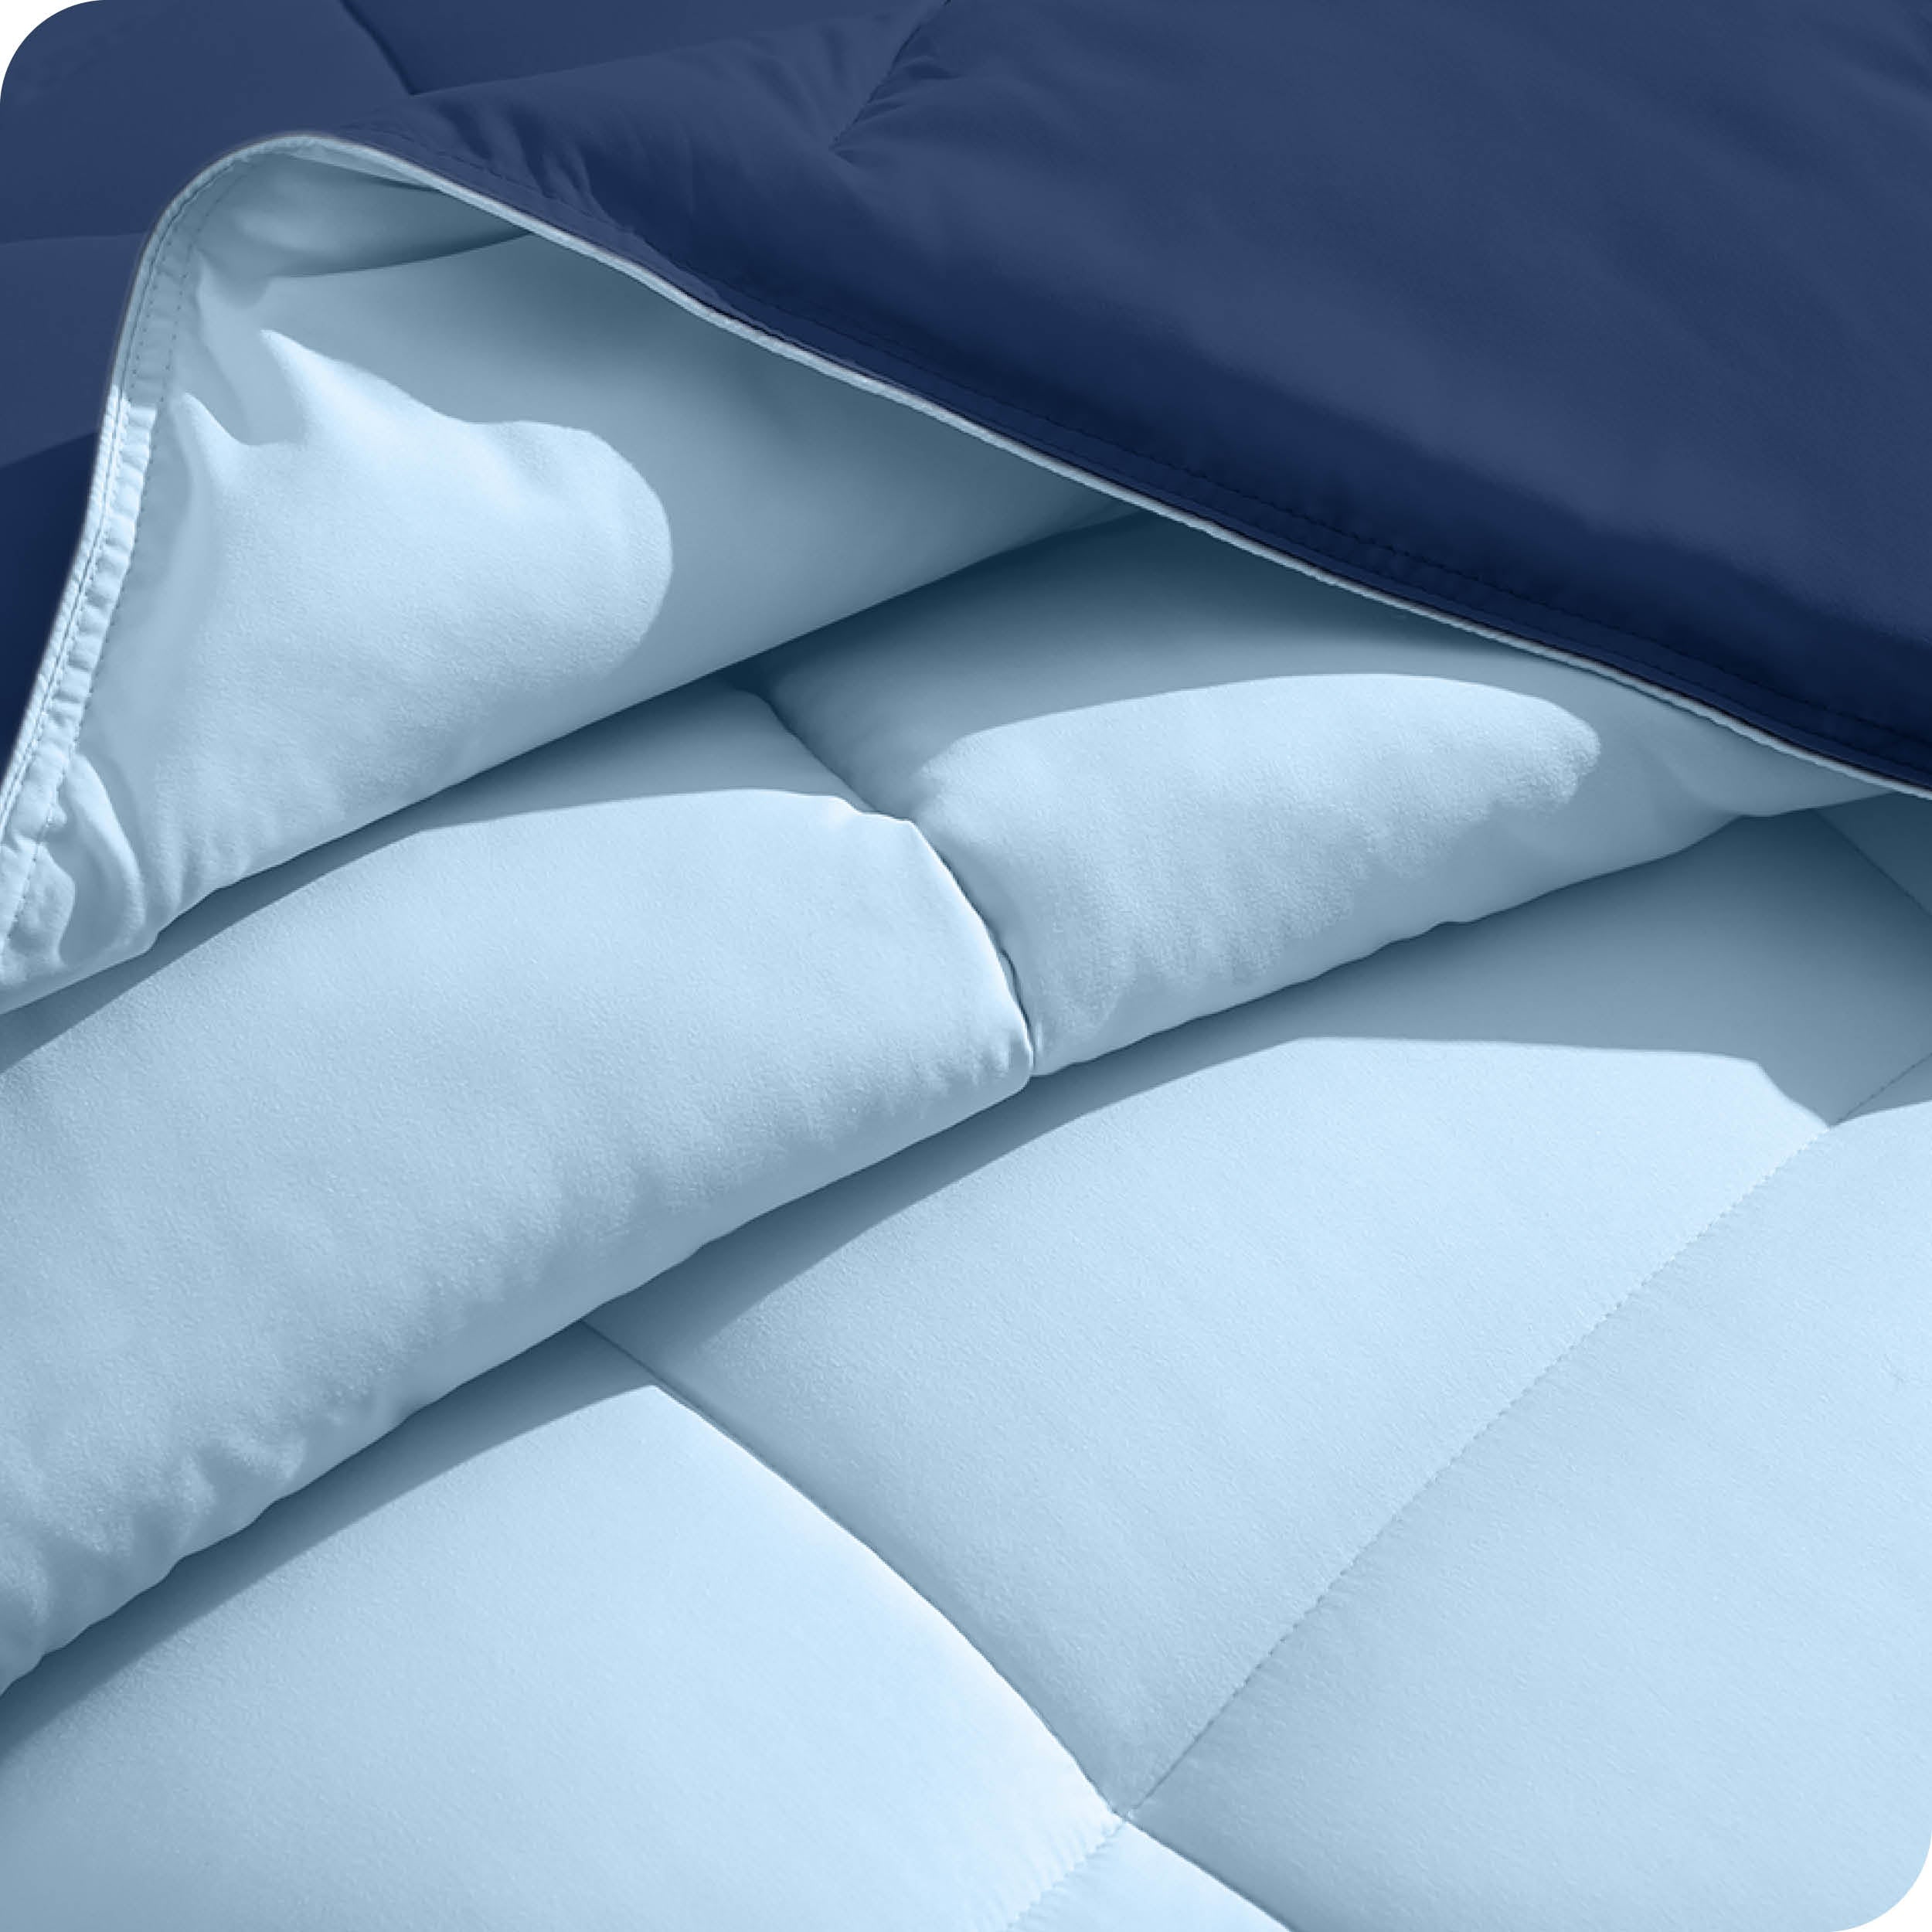 Close up of the comforter folded back showing the two different colored sides